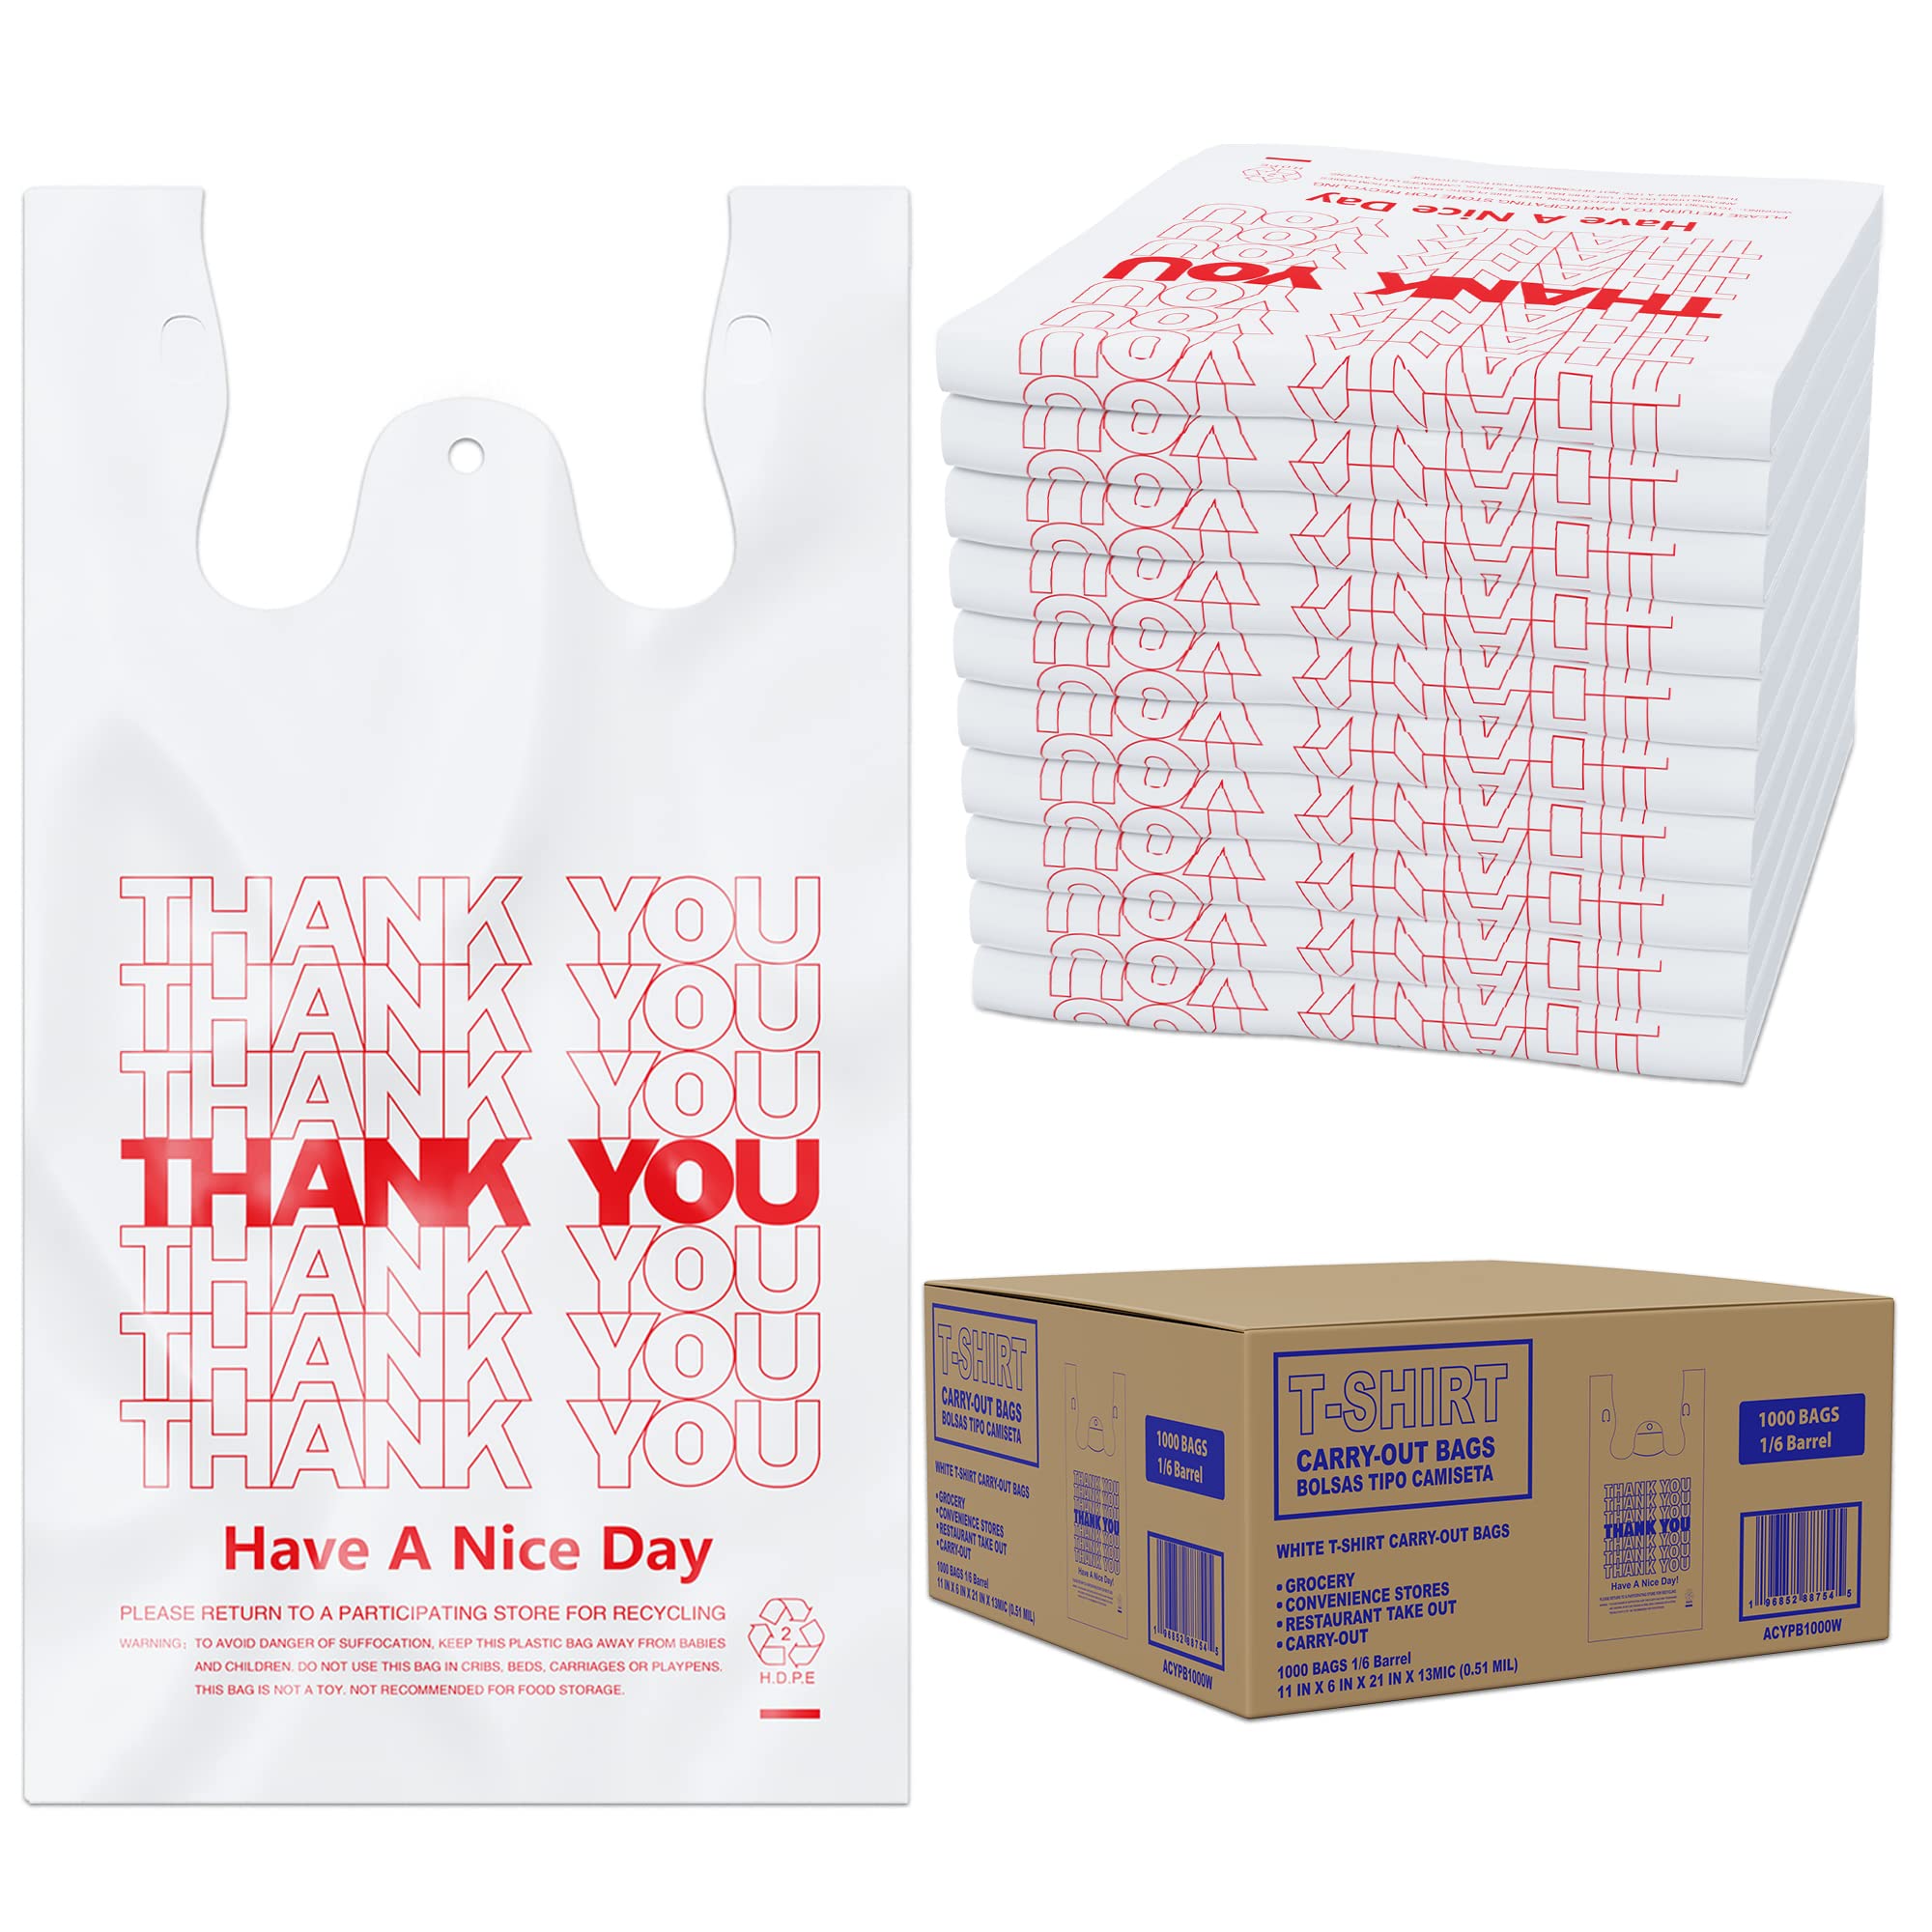 Thank you T-Shirt plastic bags - Song Bang Plastic - Biodegradable Plastic  Bag Manufacturers, Suppliers and Exporters‎